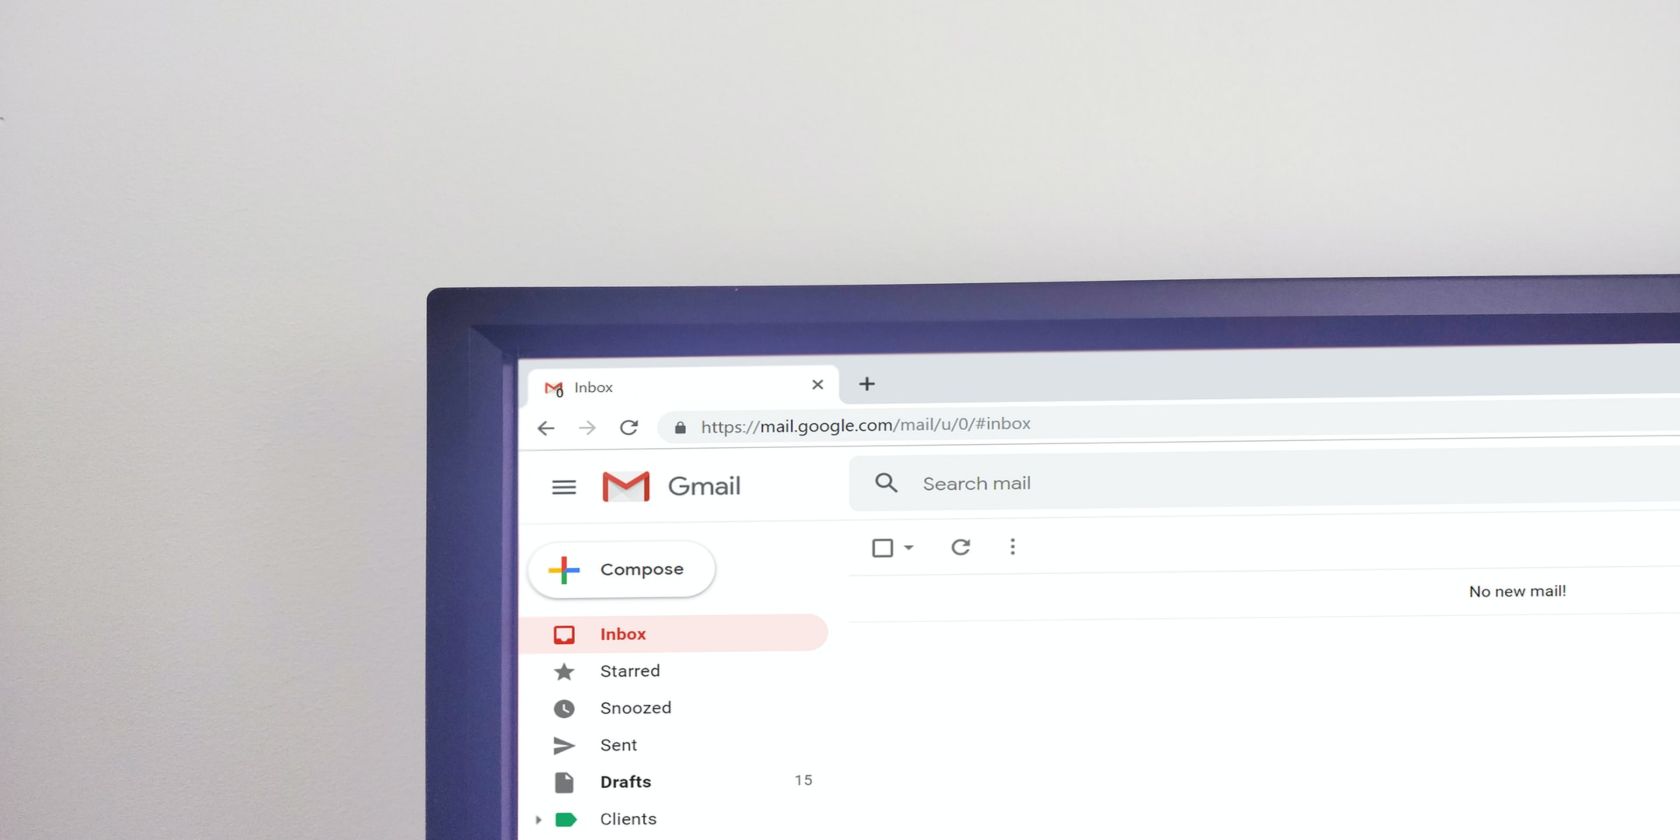 Image shows the top left corner of a computer screen that shows a Gmail inbox